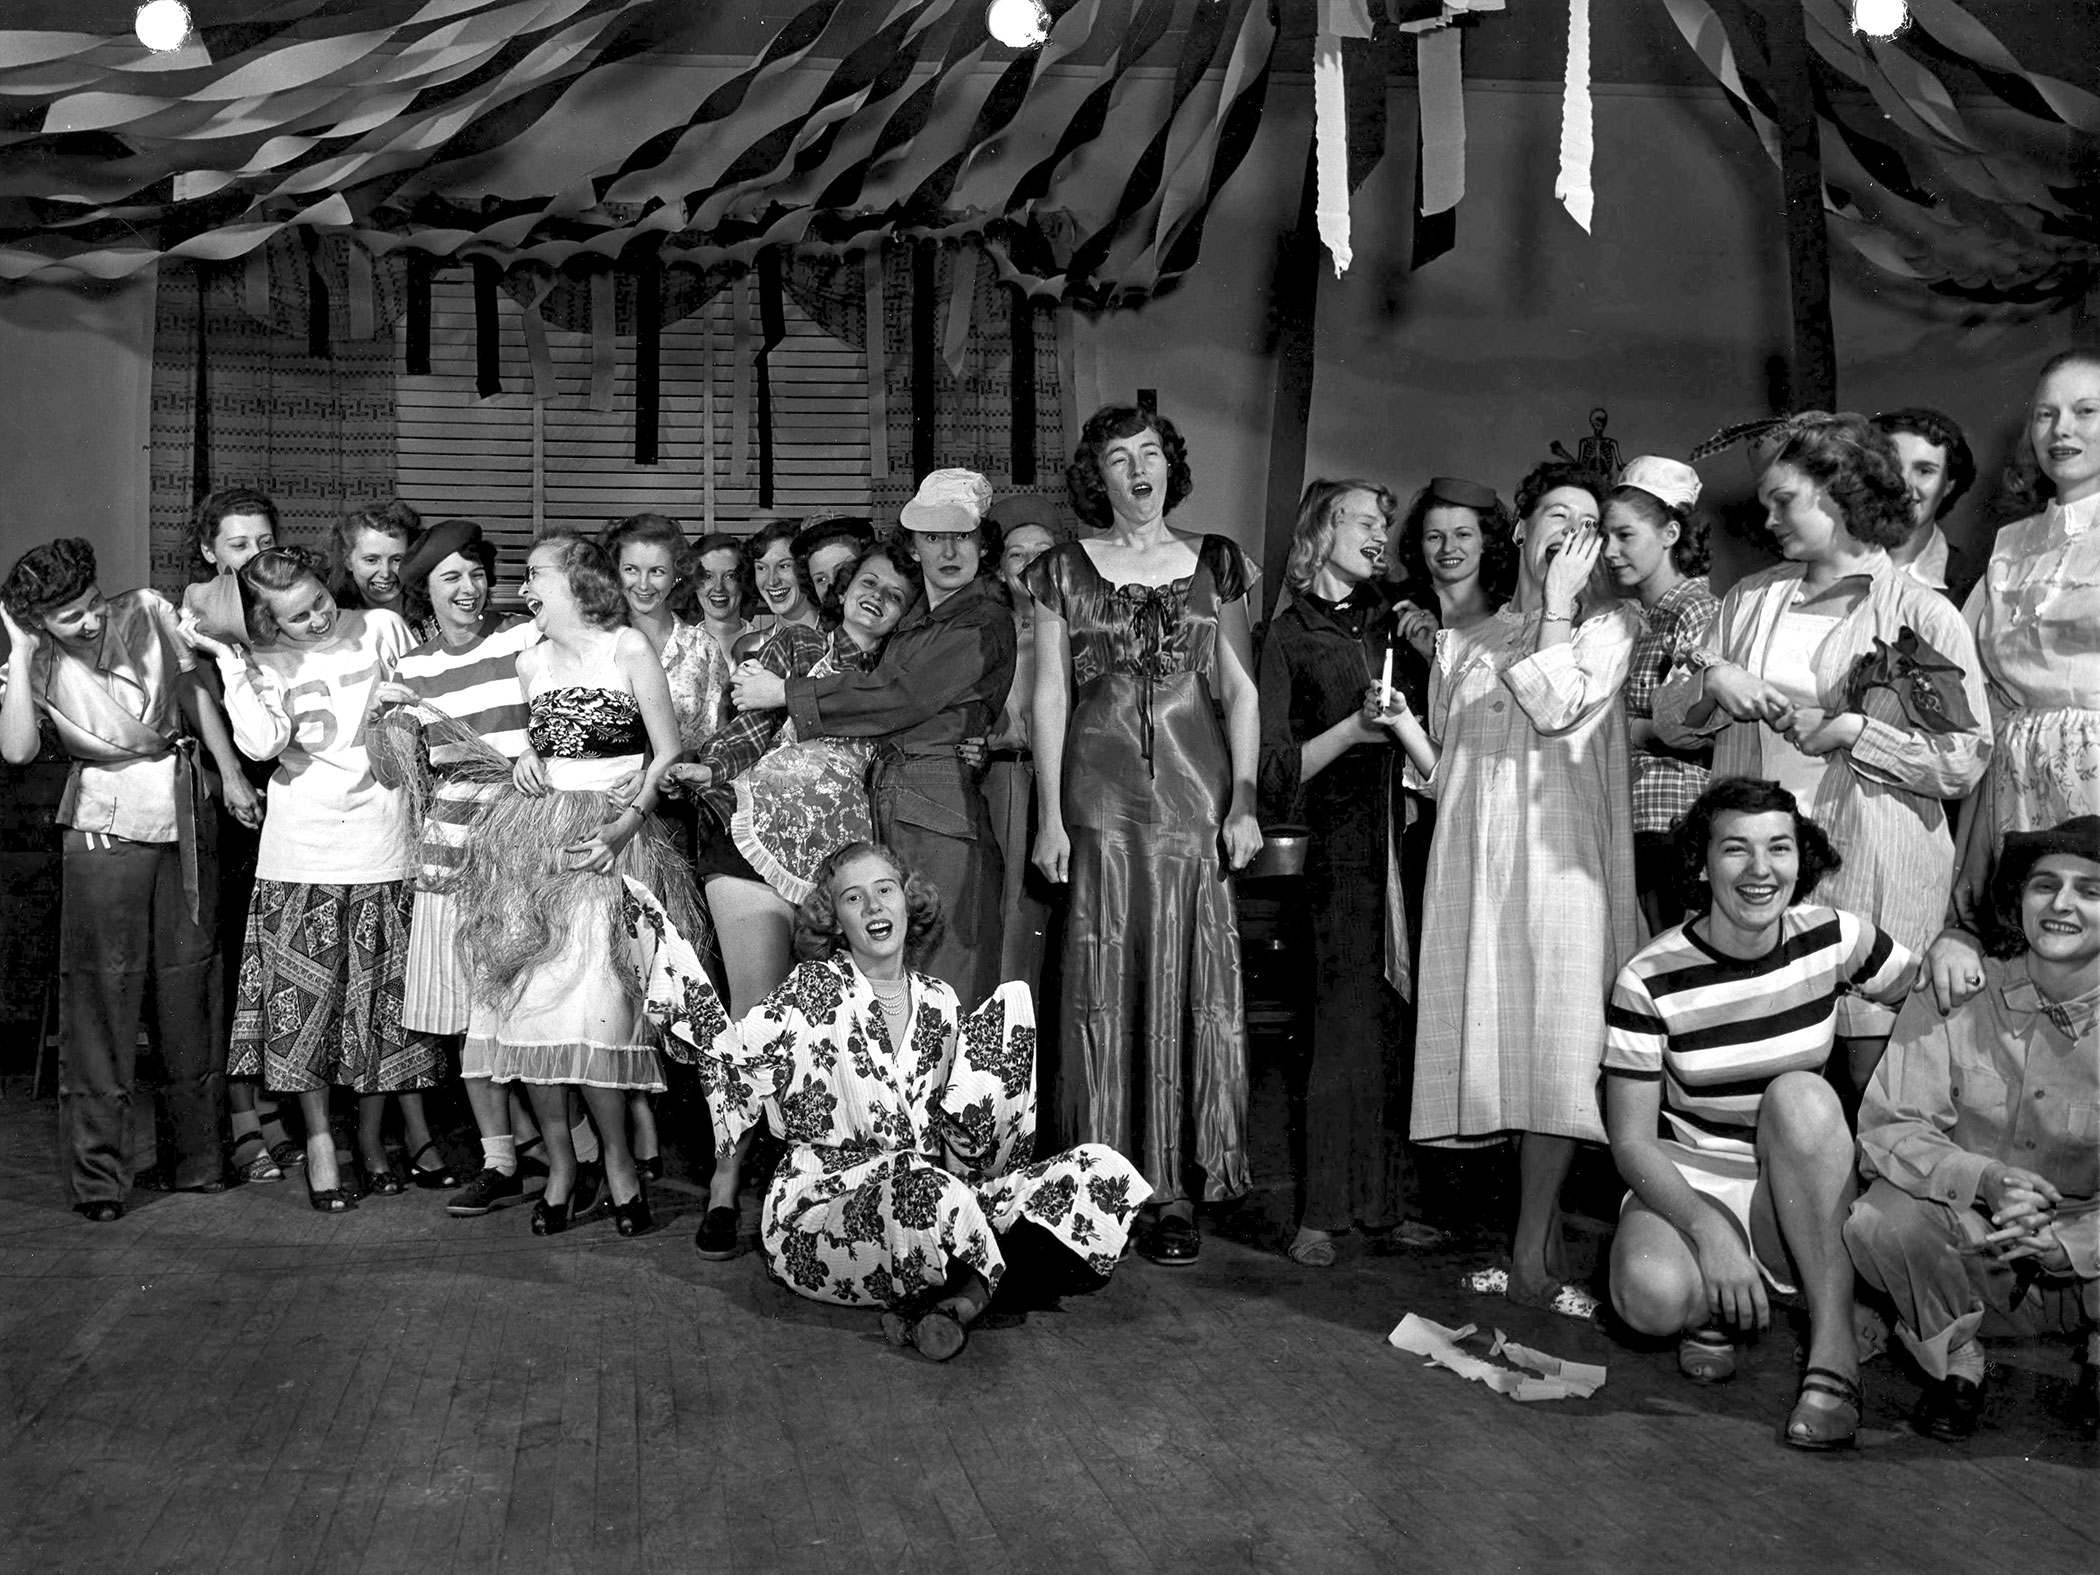 A large group of women wear costumes, perhaps for a skit or a party. Streamers hang from the ceiling. Circa 1947.